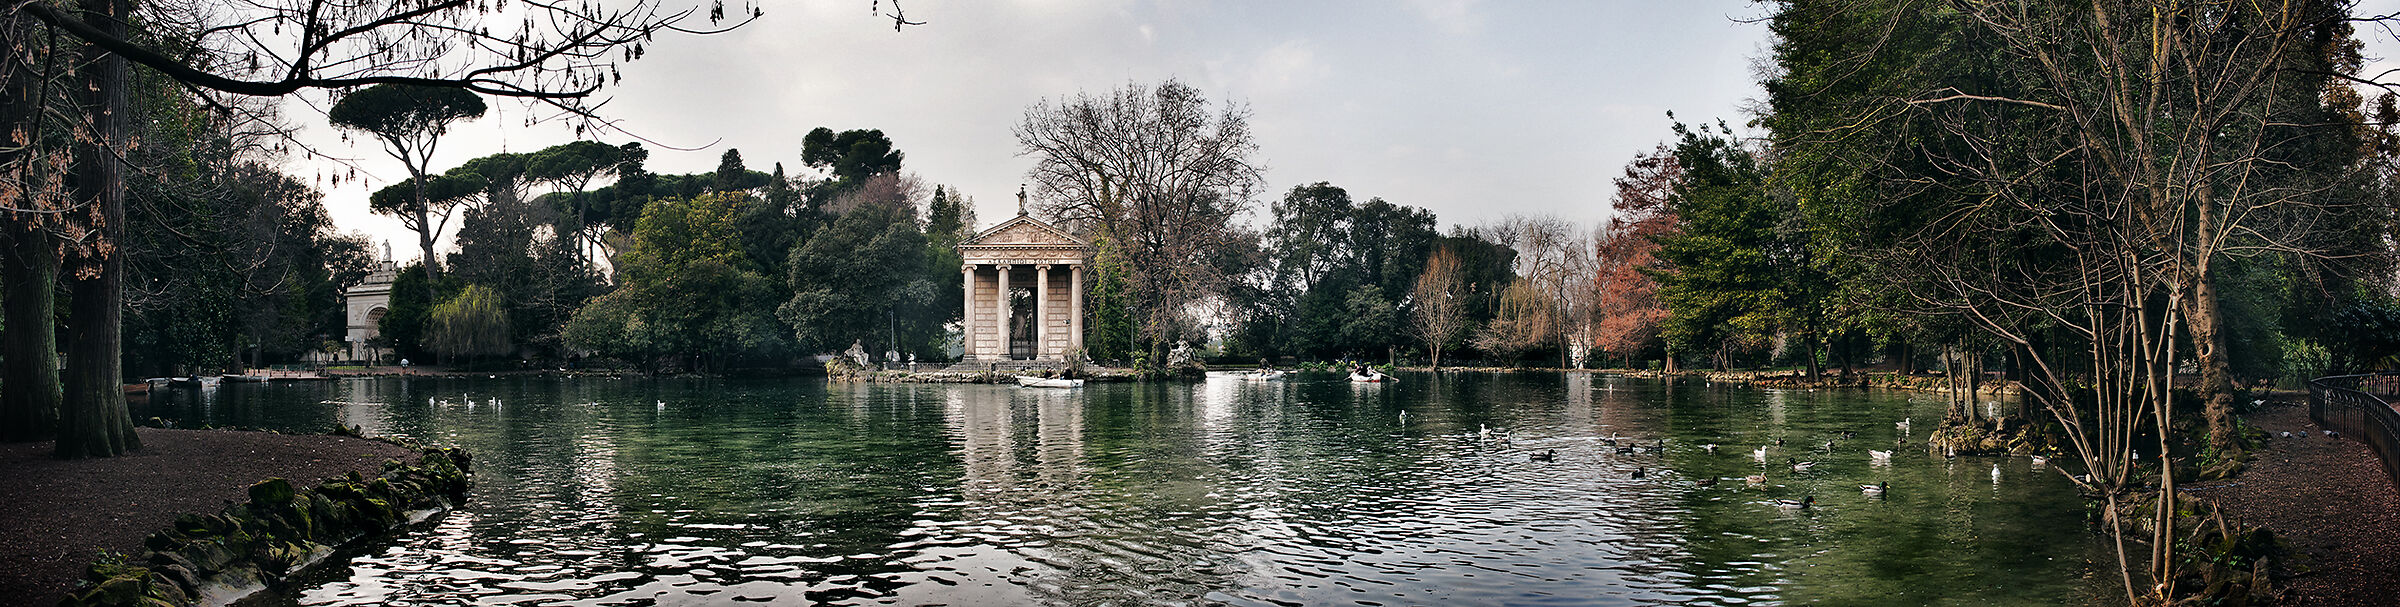 Pond of Villa Borghese and temple of Diana Roma...